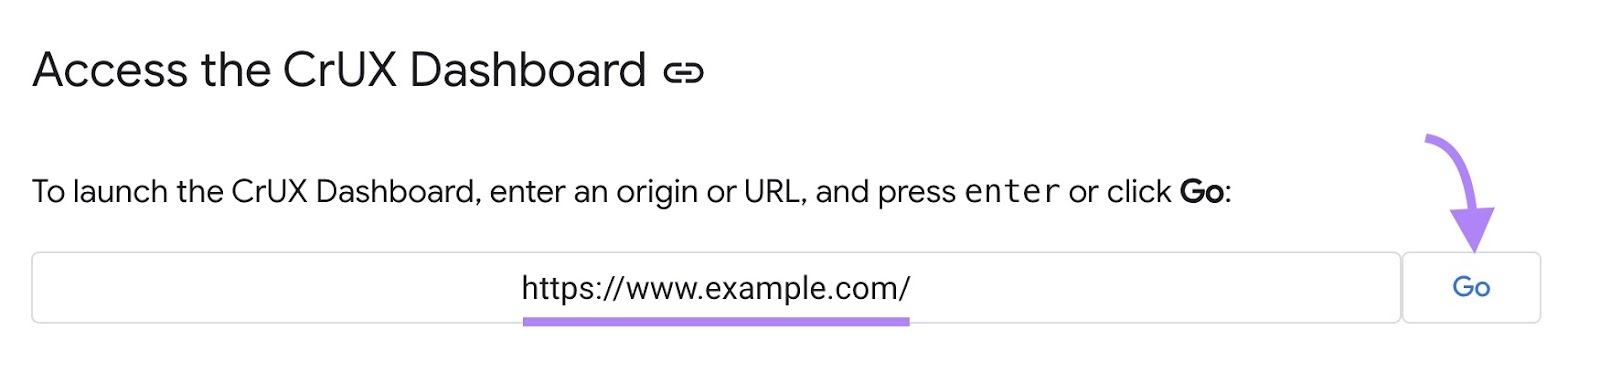 "CrUX Dashboard" tool start with "https://www.example.com" entered as the domain and the "Go" button clicked.